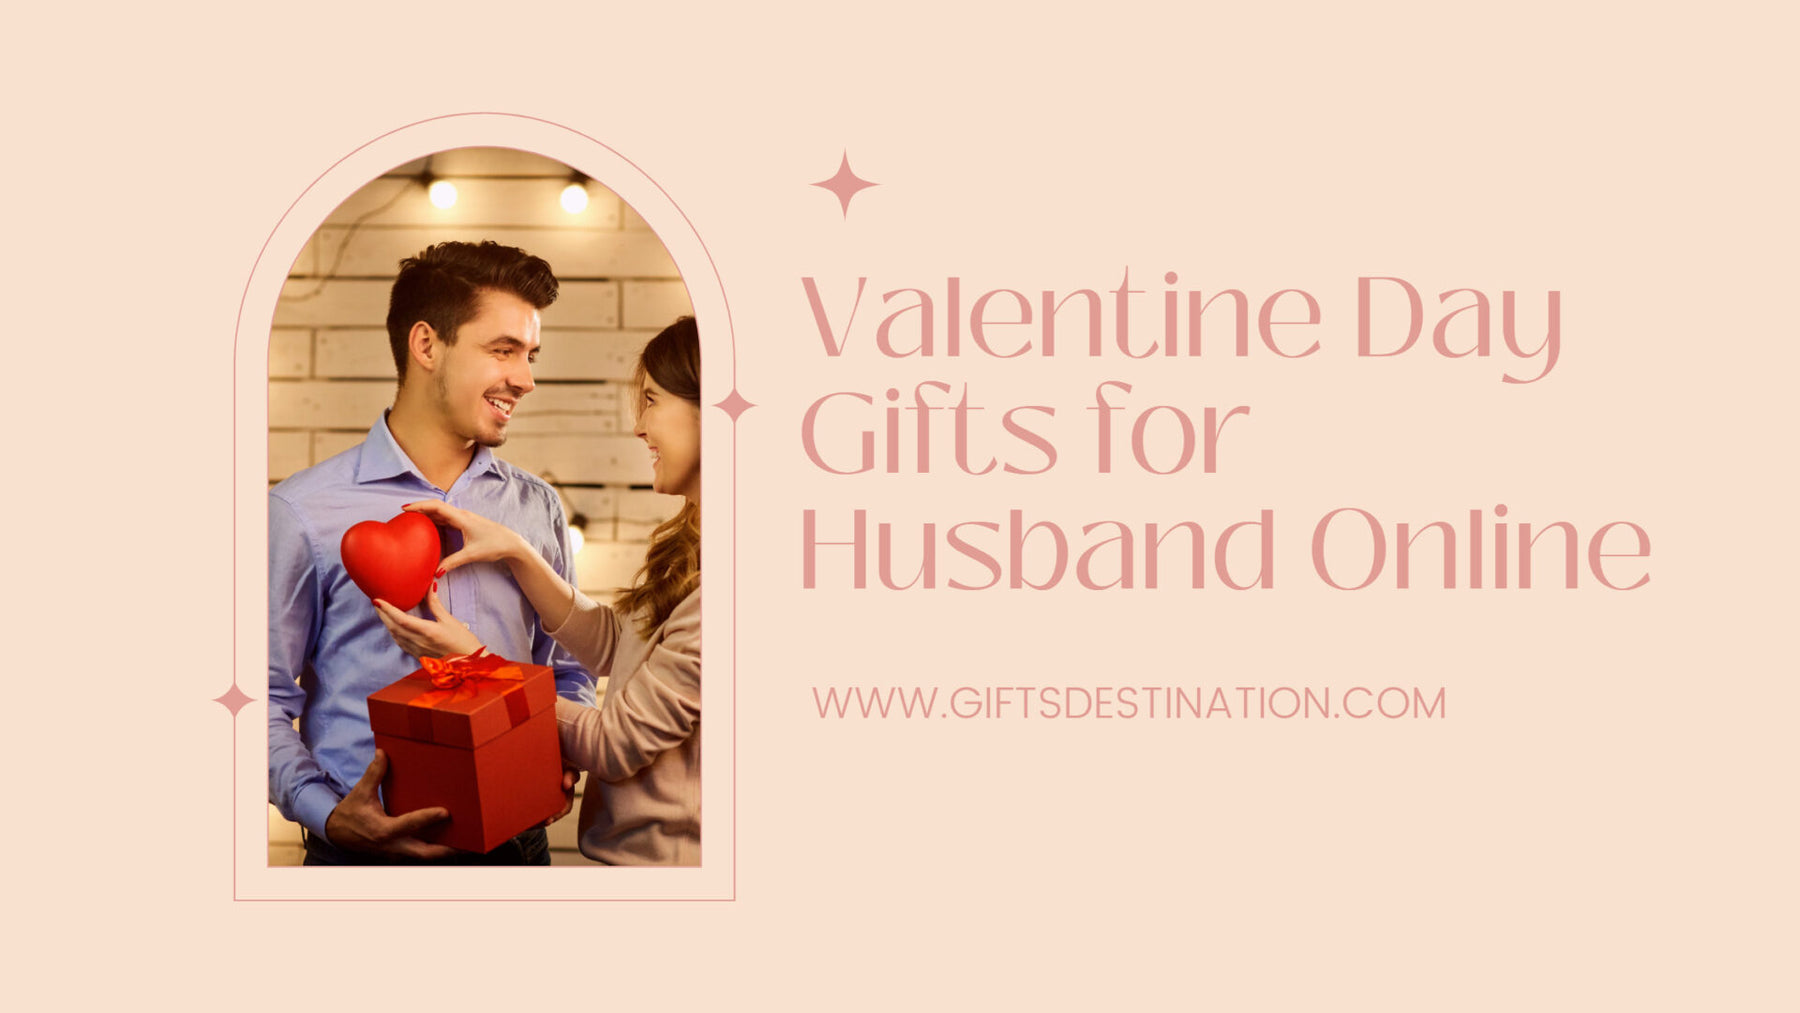 Valentine Day Gifts for Husband Online